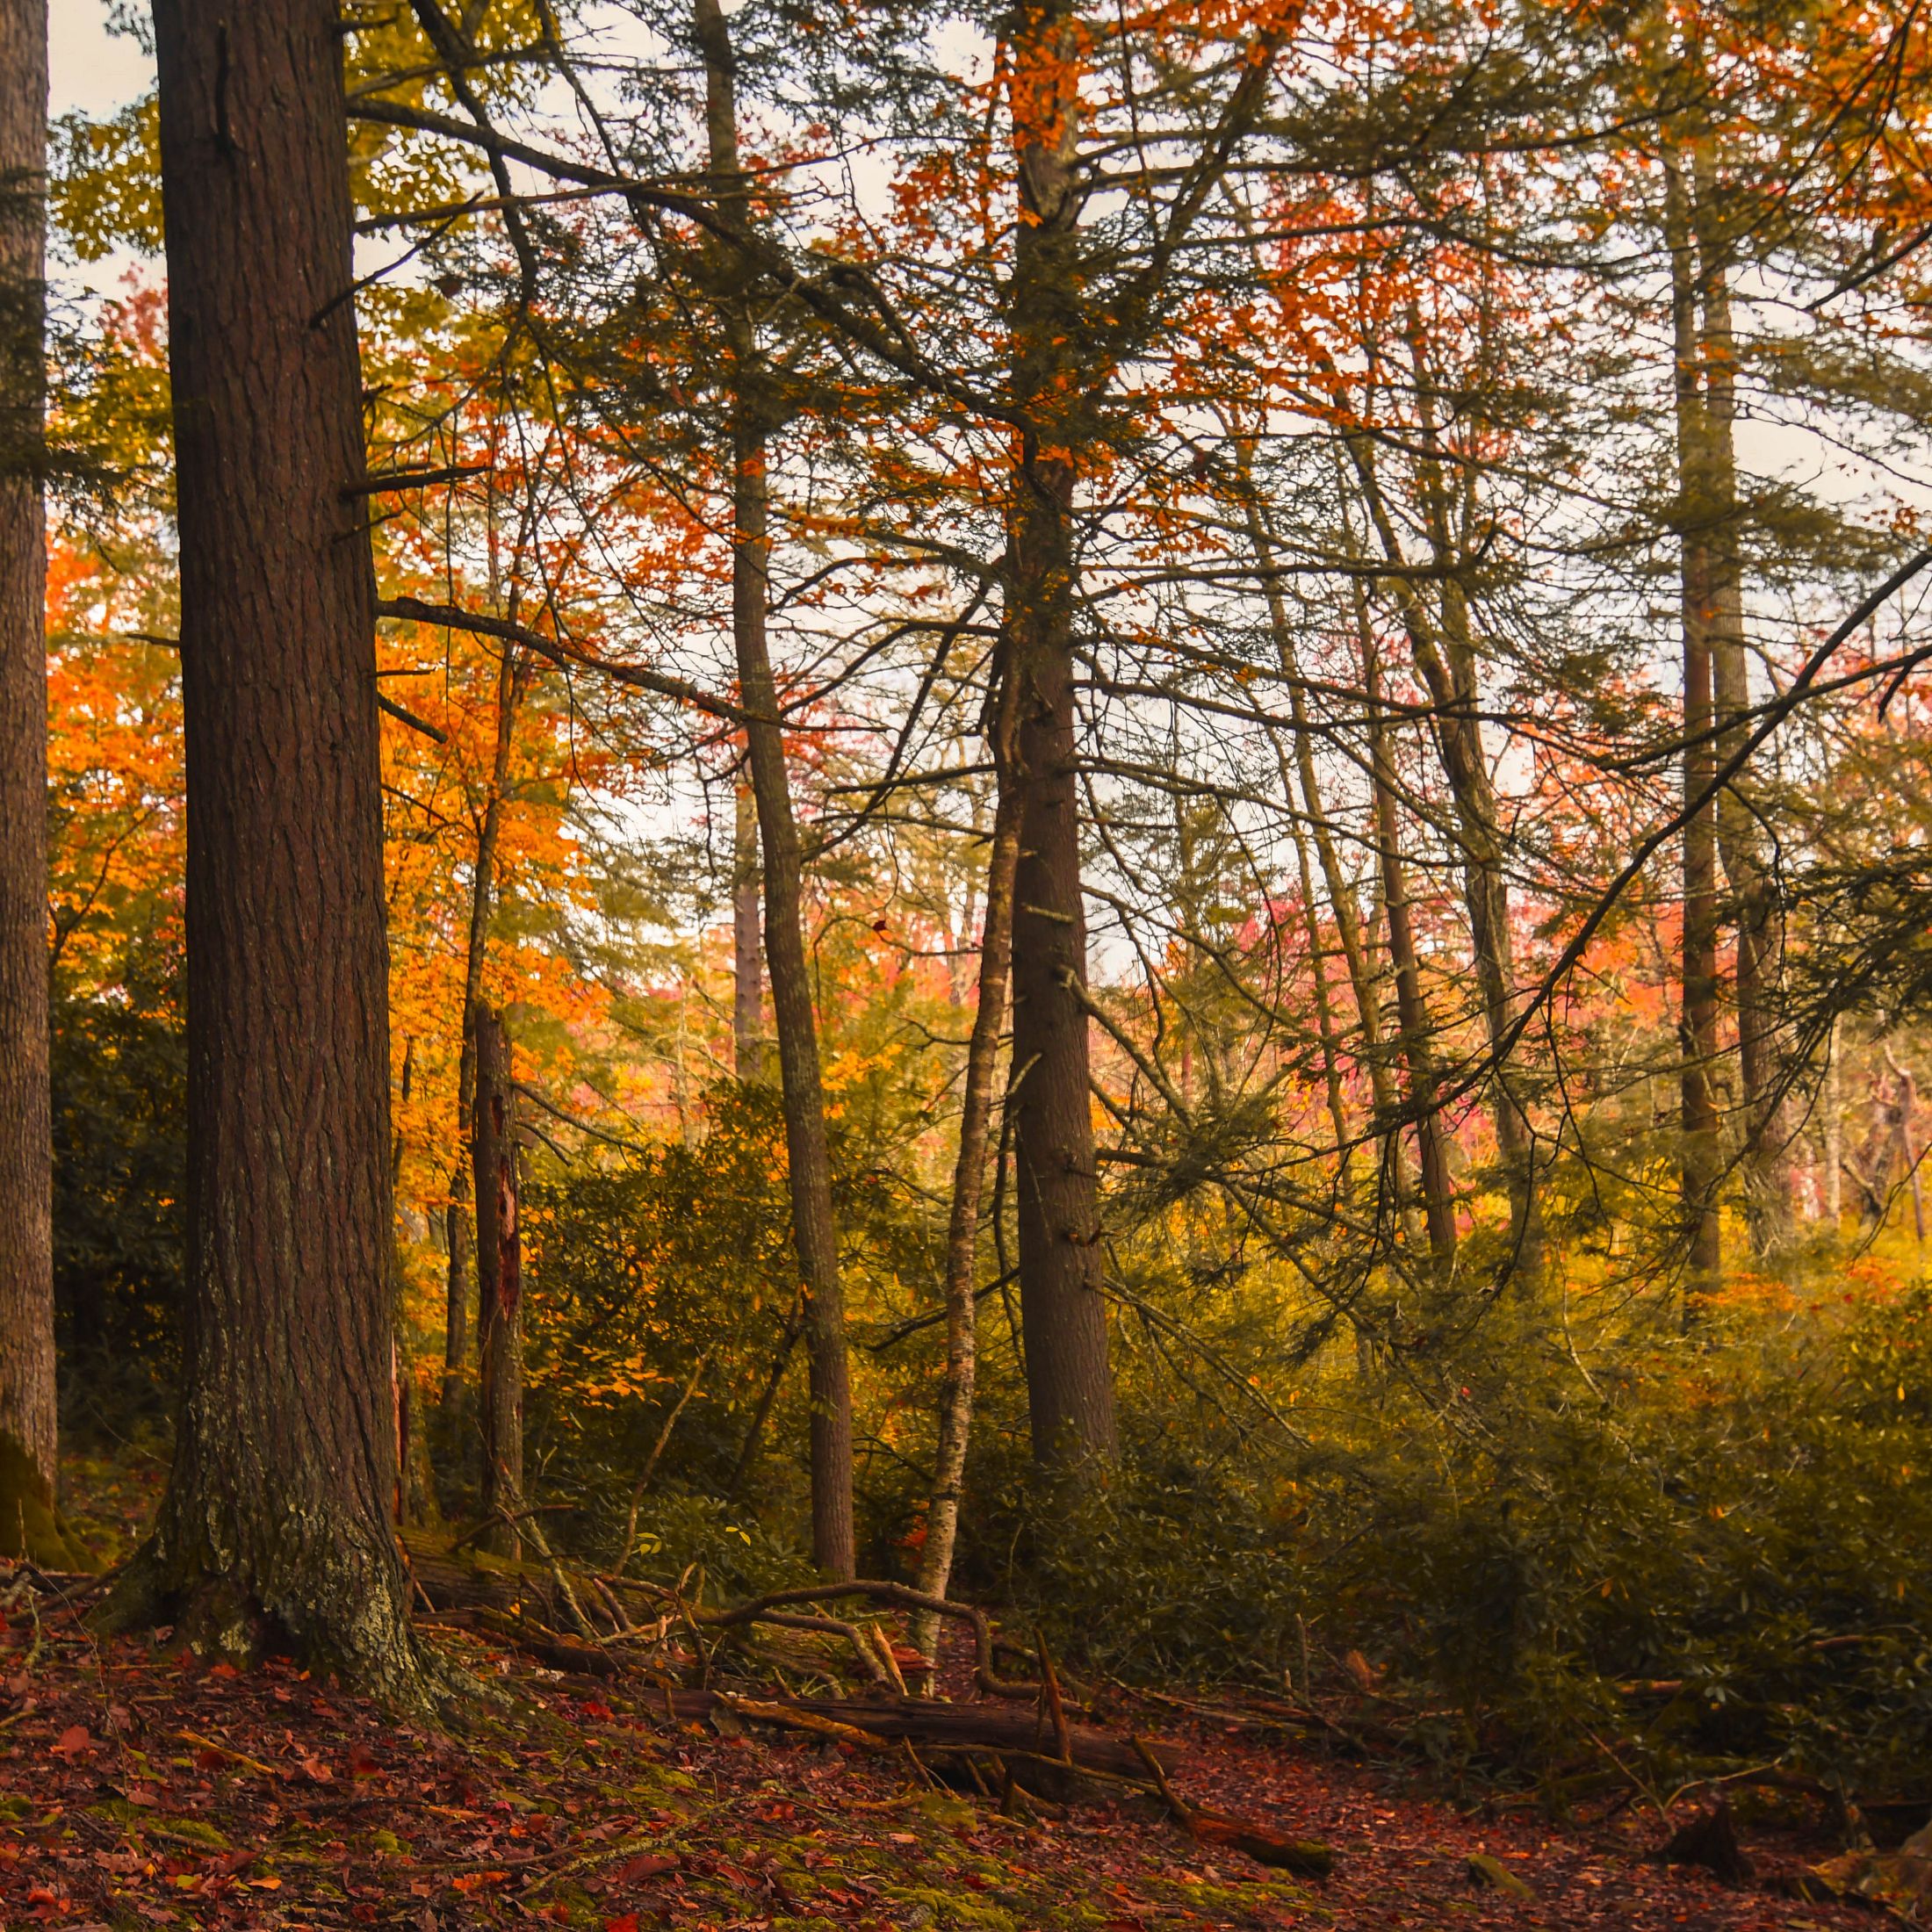 A view of a forest with bright red, orange, and yellow fall-colored leaves. 